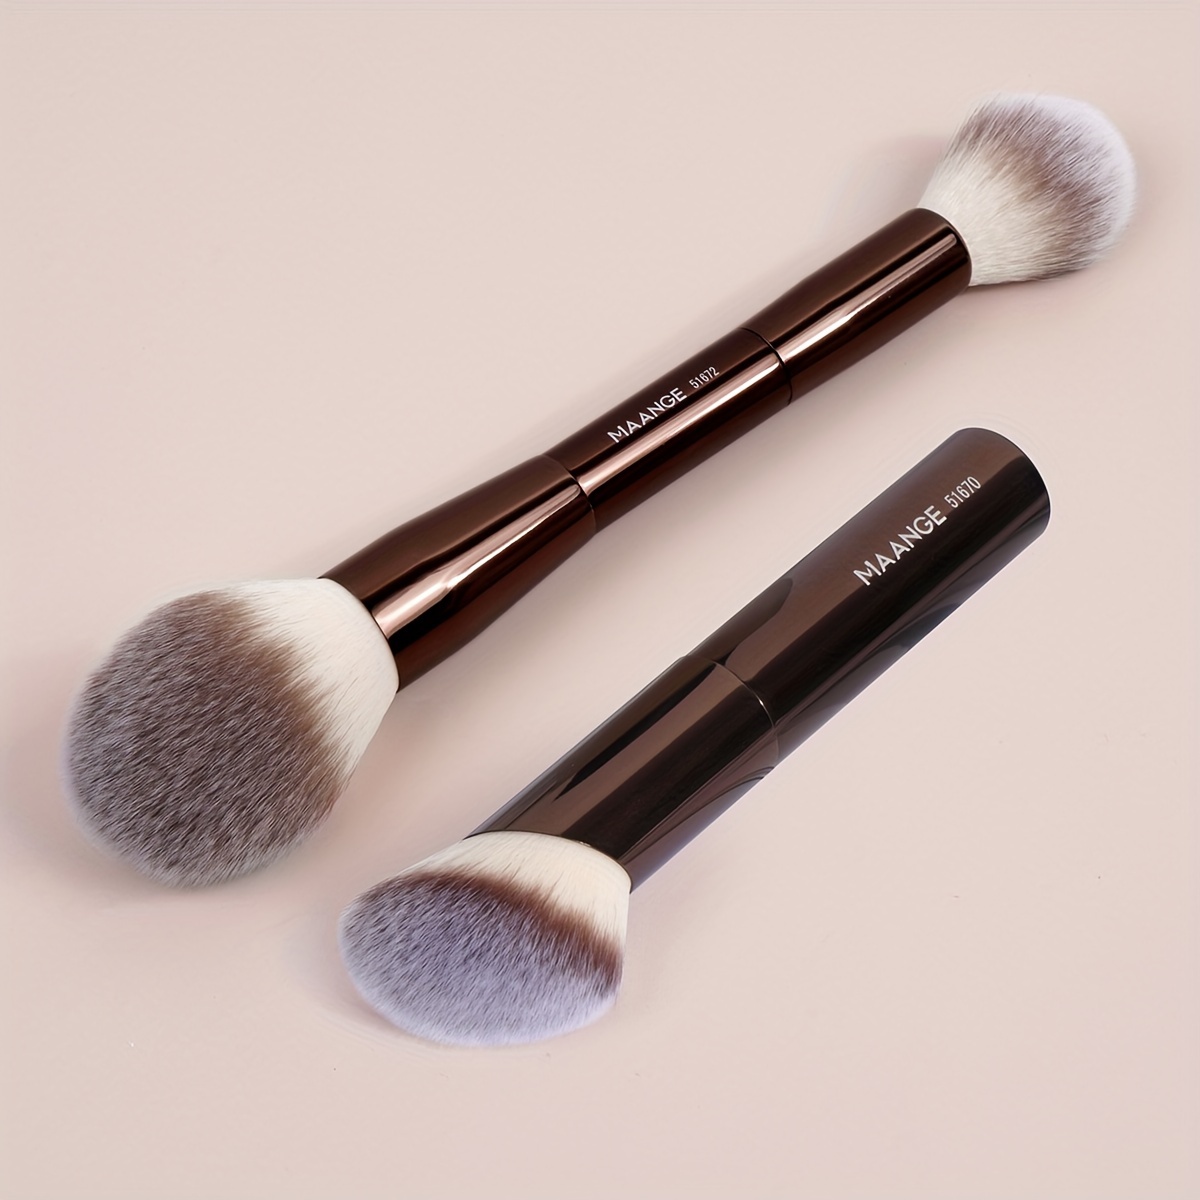 

Maange 2-piece Luxe Makeup Brush Set - Soft Nylon Bristles For Flawless Foundation & Blush Application, Fragrance-free, All Skin Types, Portable Travel Design